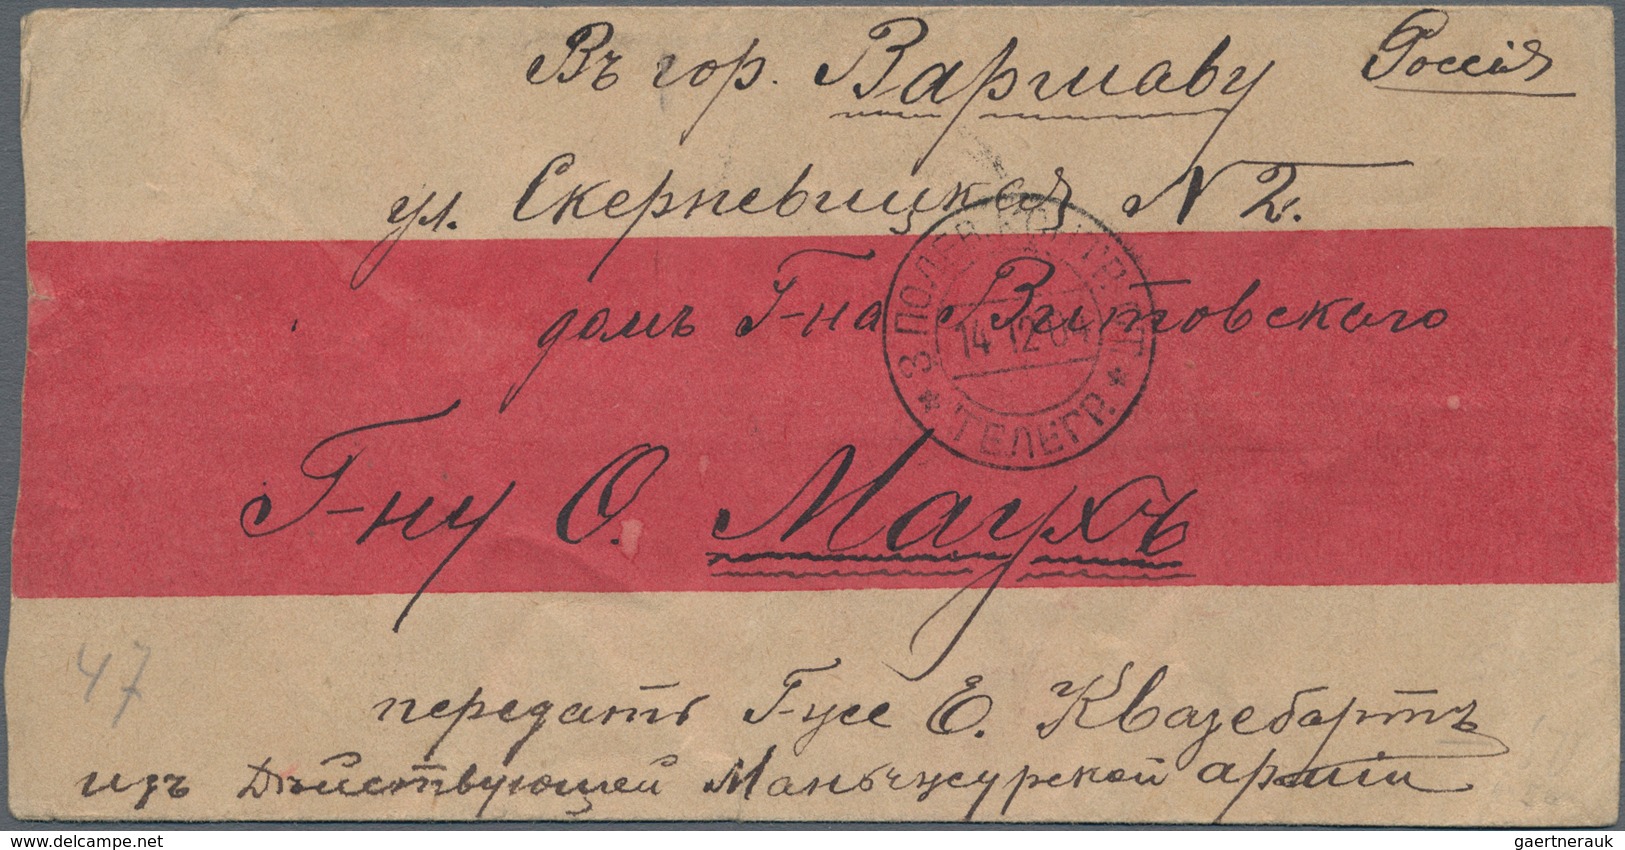 Russische Post In China: 14.12.1904 Russo-Japanese War Chinese Red-band Cover From 3 FIELD CONTROL S - China